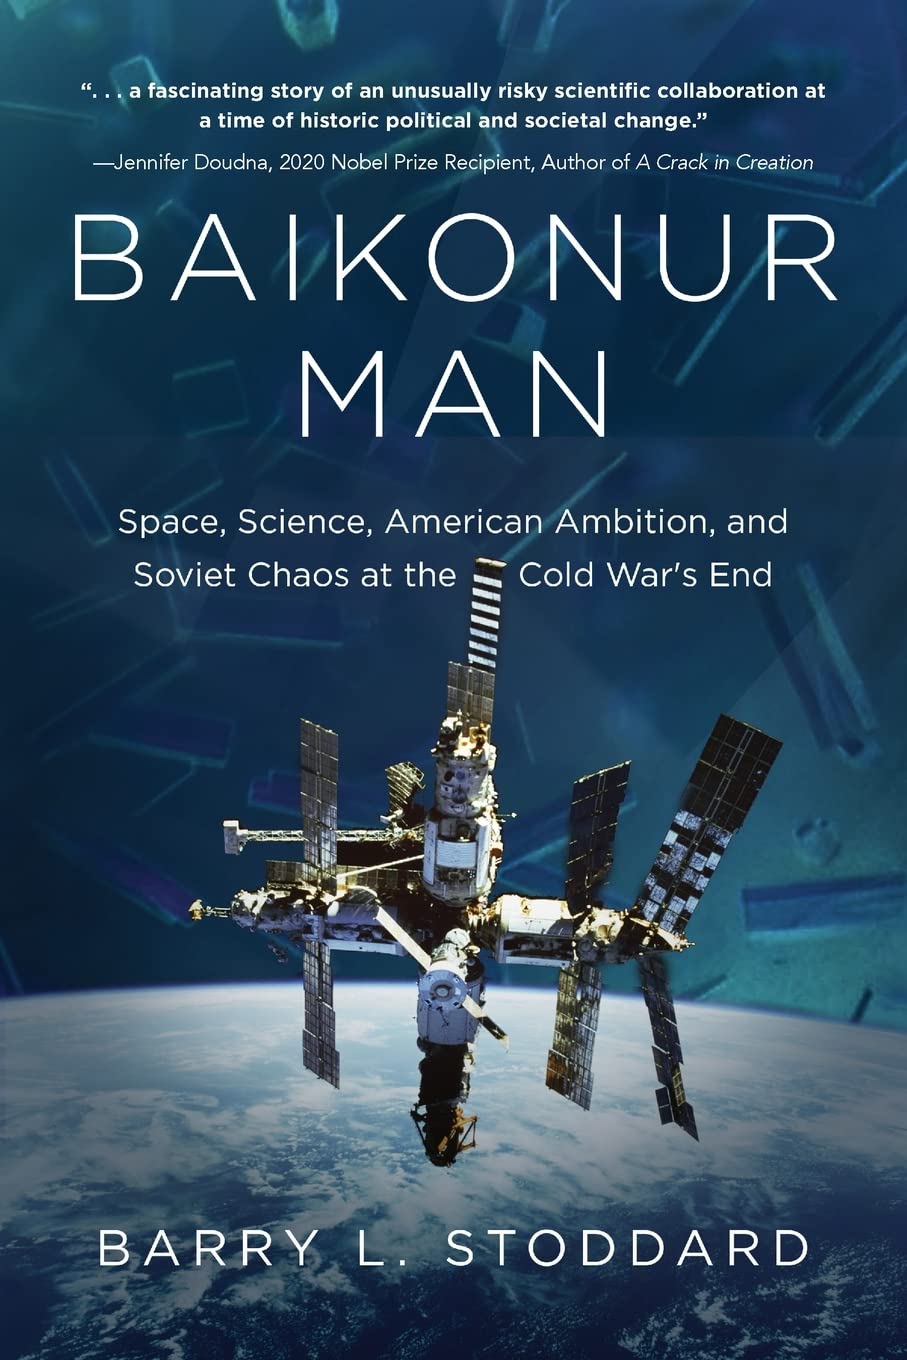 Baikonur Man: Space, Science, American Ambition, and Russian Chaos at the Cold War’s End